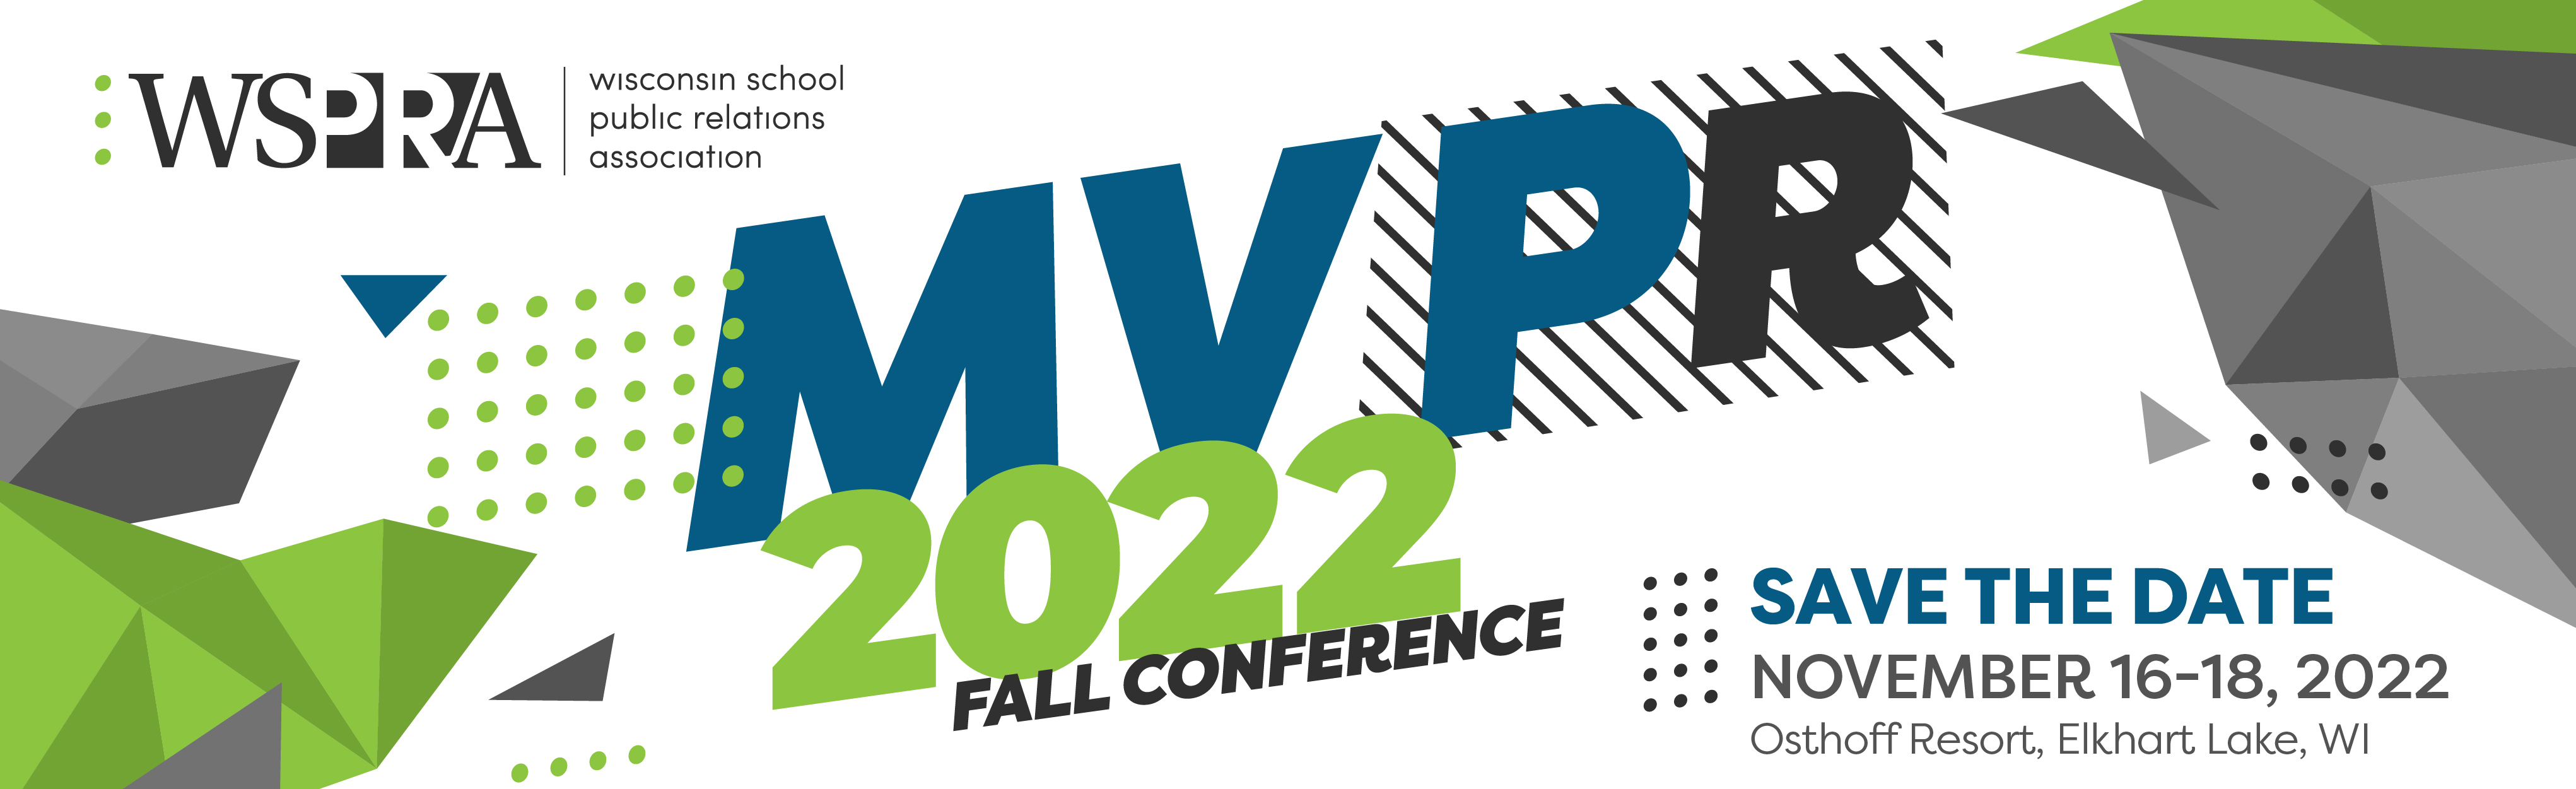 2022 Fall Conference Save the Date